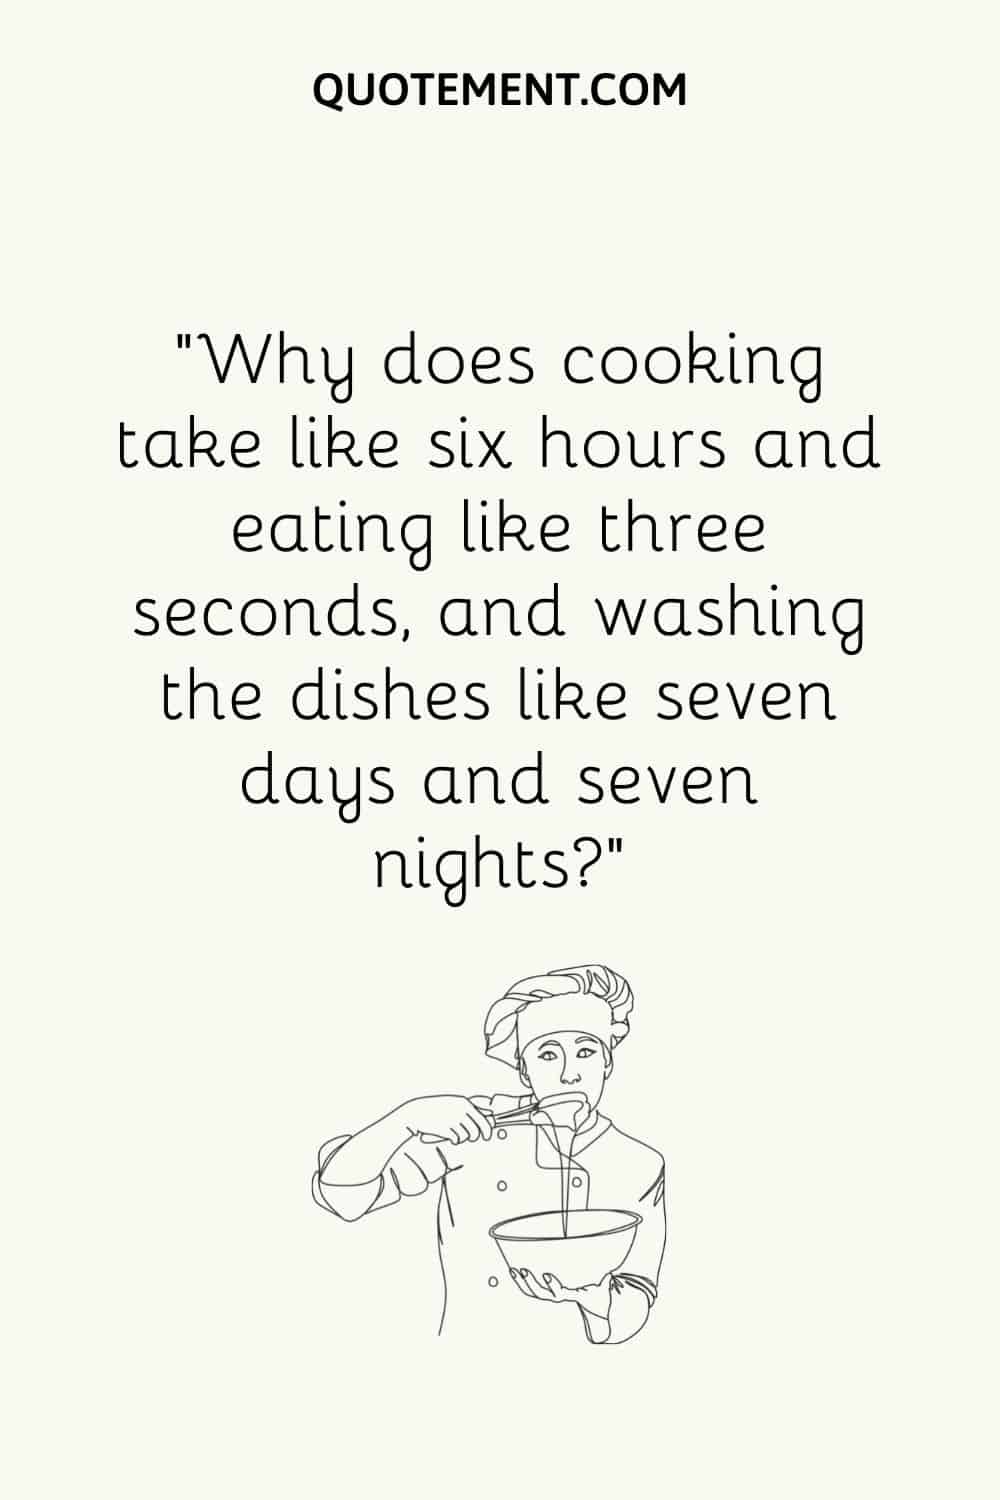 Why does cooking take like six hours and eating like three seconds, and washing the dishes like seven days and seven nights